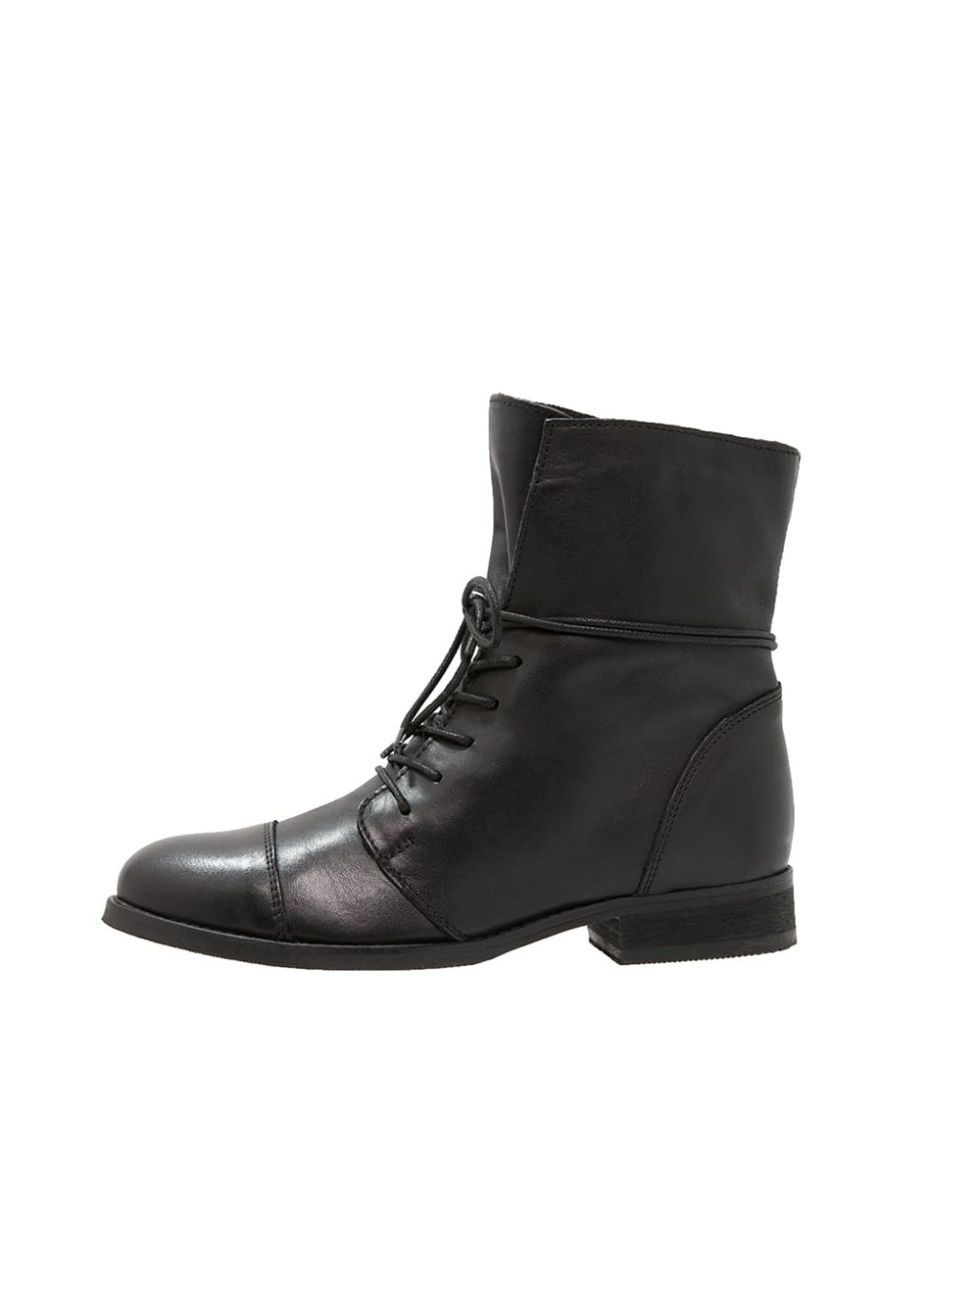 Footwear, Boot, Shoe, Black, Leather, Work boots, Steel-toe boot, Brand, Motorcycle boot, Snow boot, 